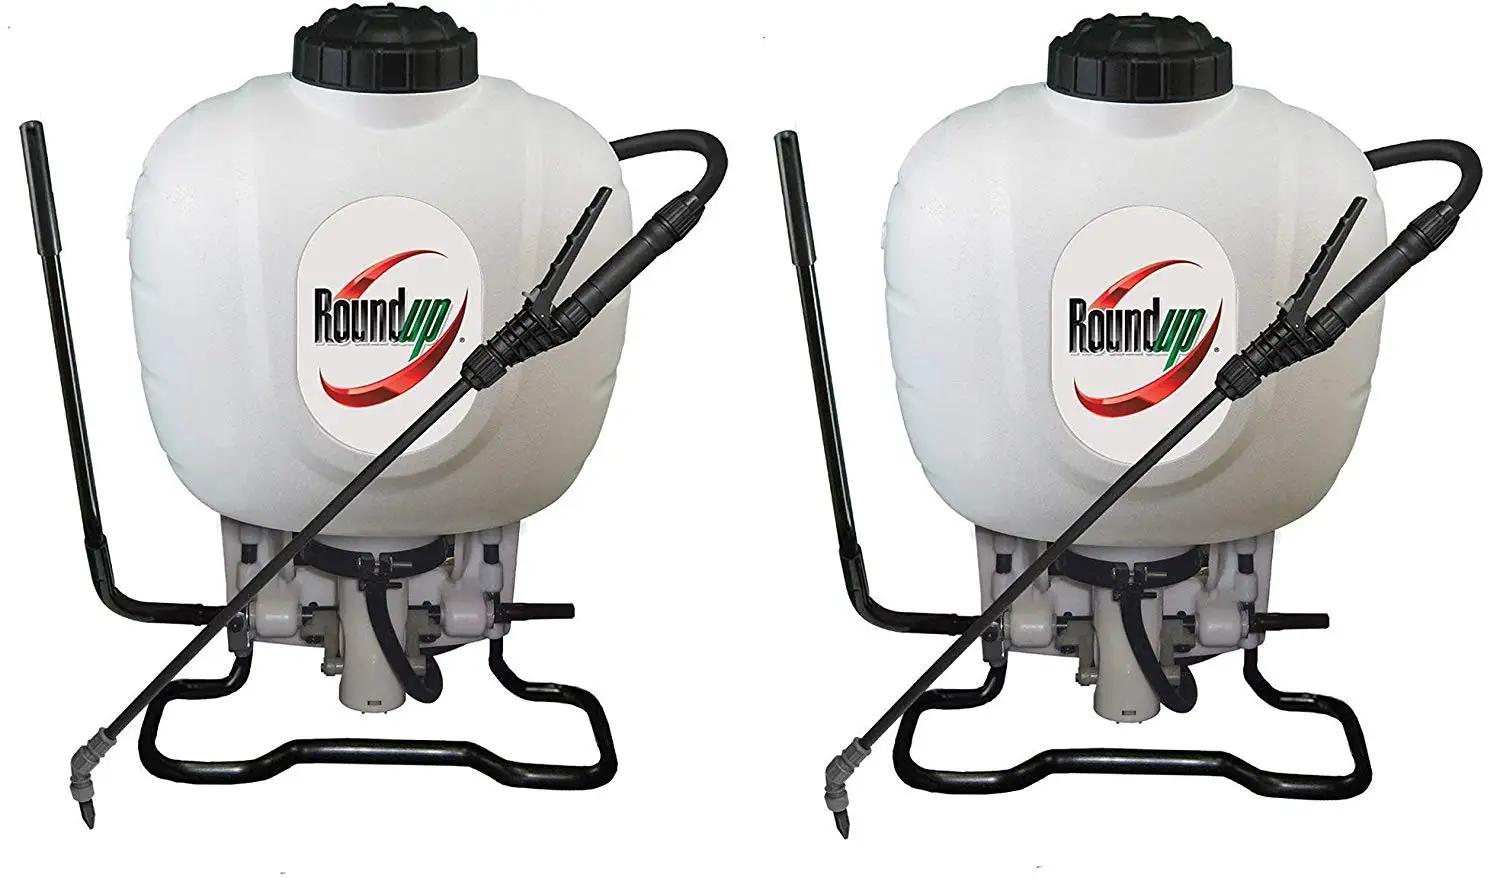 Buy Roundup 190314 Backpack Sprayer for Fertilizers, Herbicides, Weed Killers & Insecticides, 4 ...